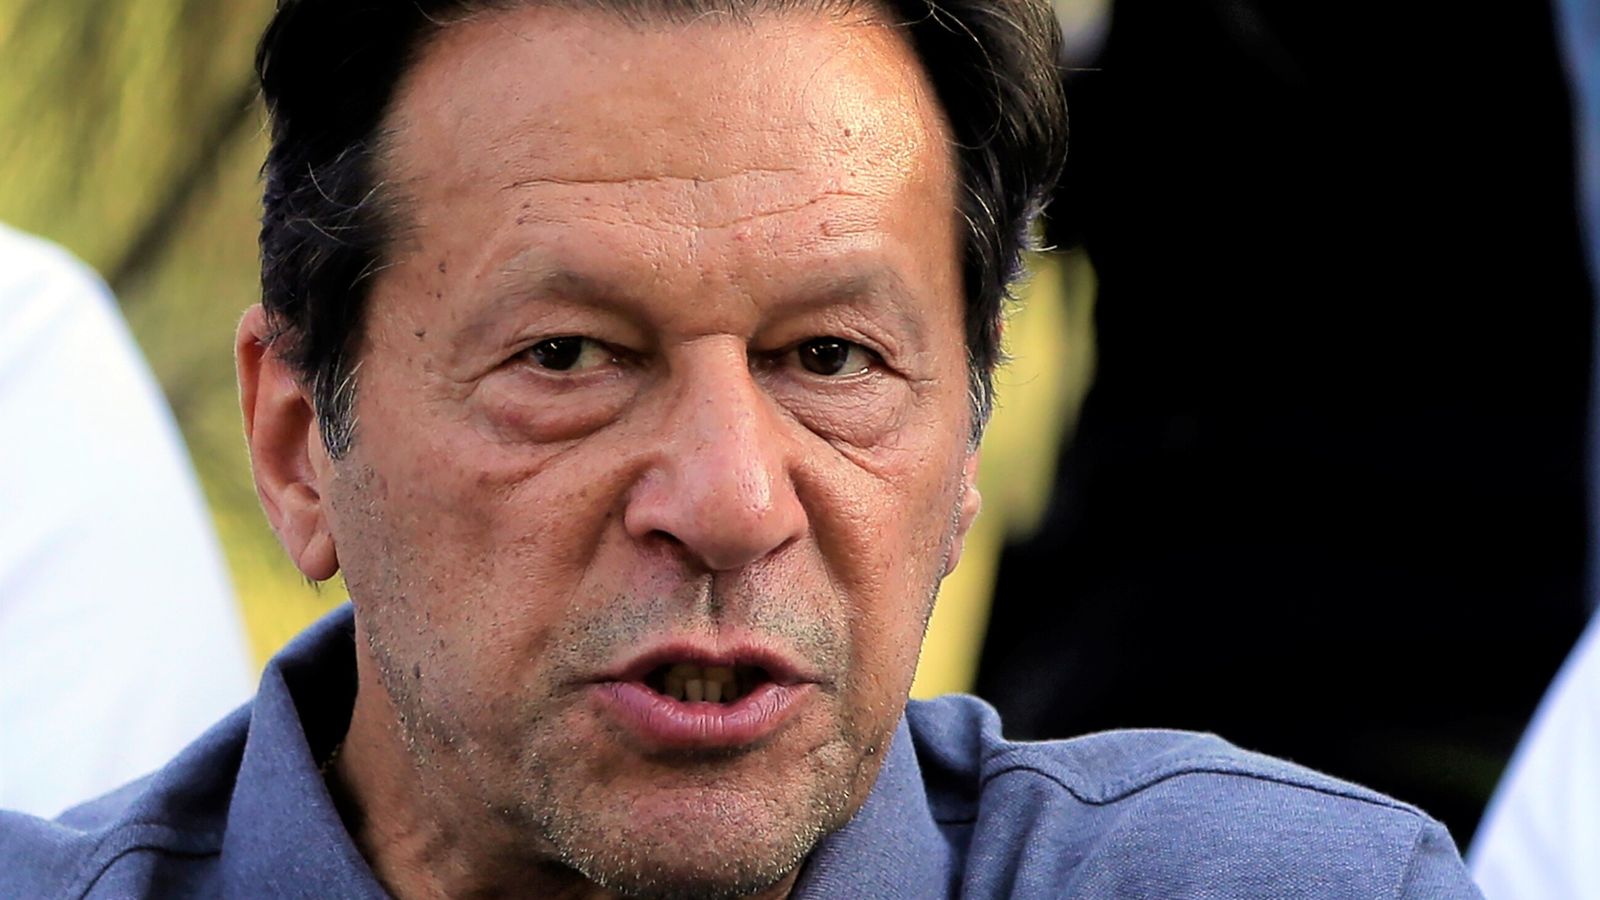 former-pakistan-pm-imran-khan-says-he-was-shot-four-times-as-he-reveals-extent-of-injuries